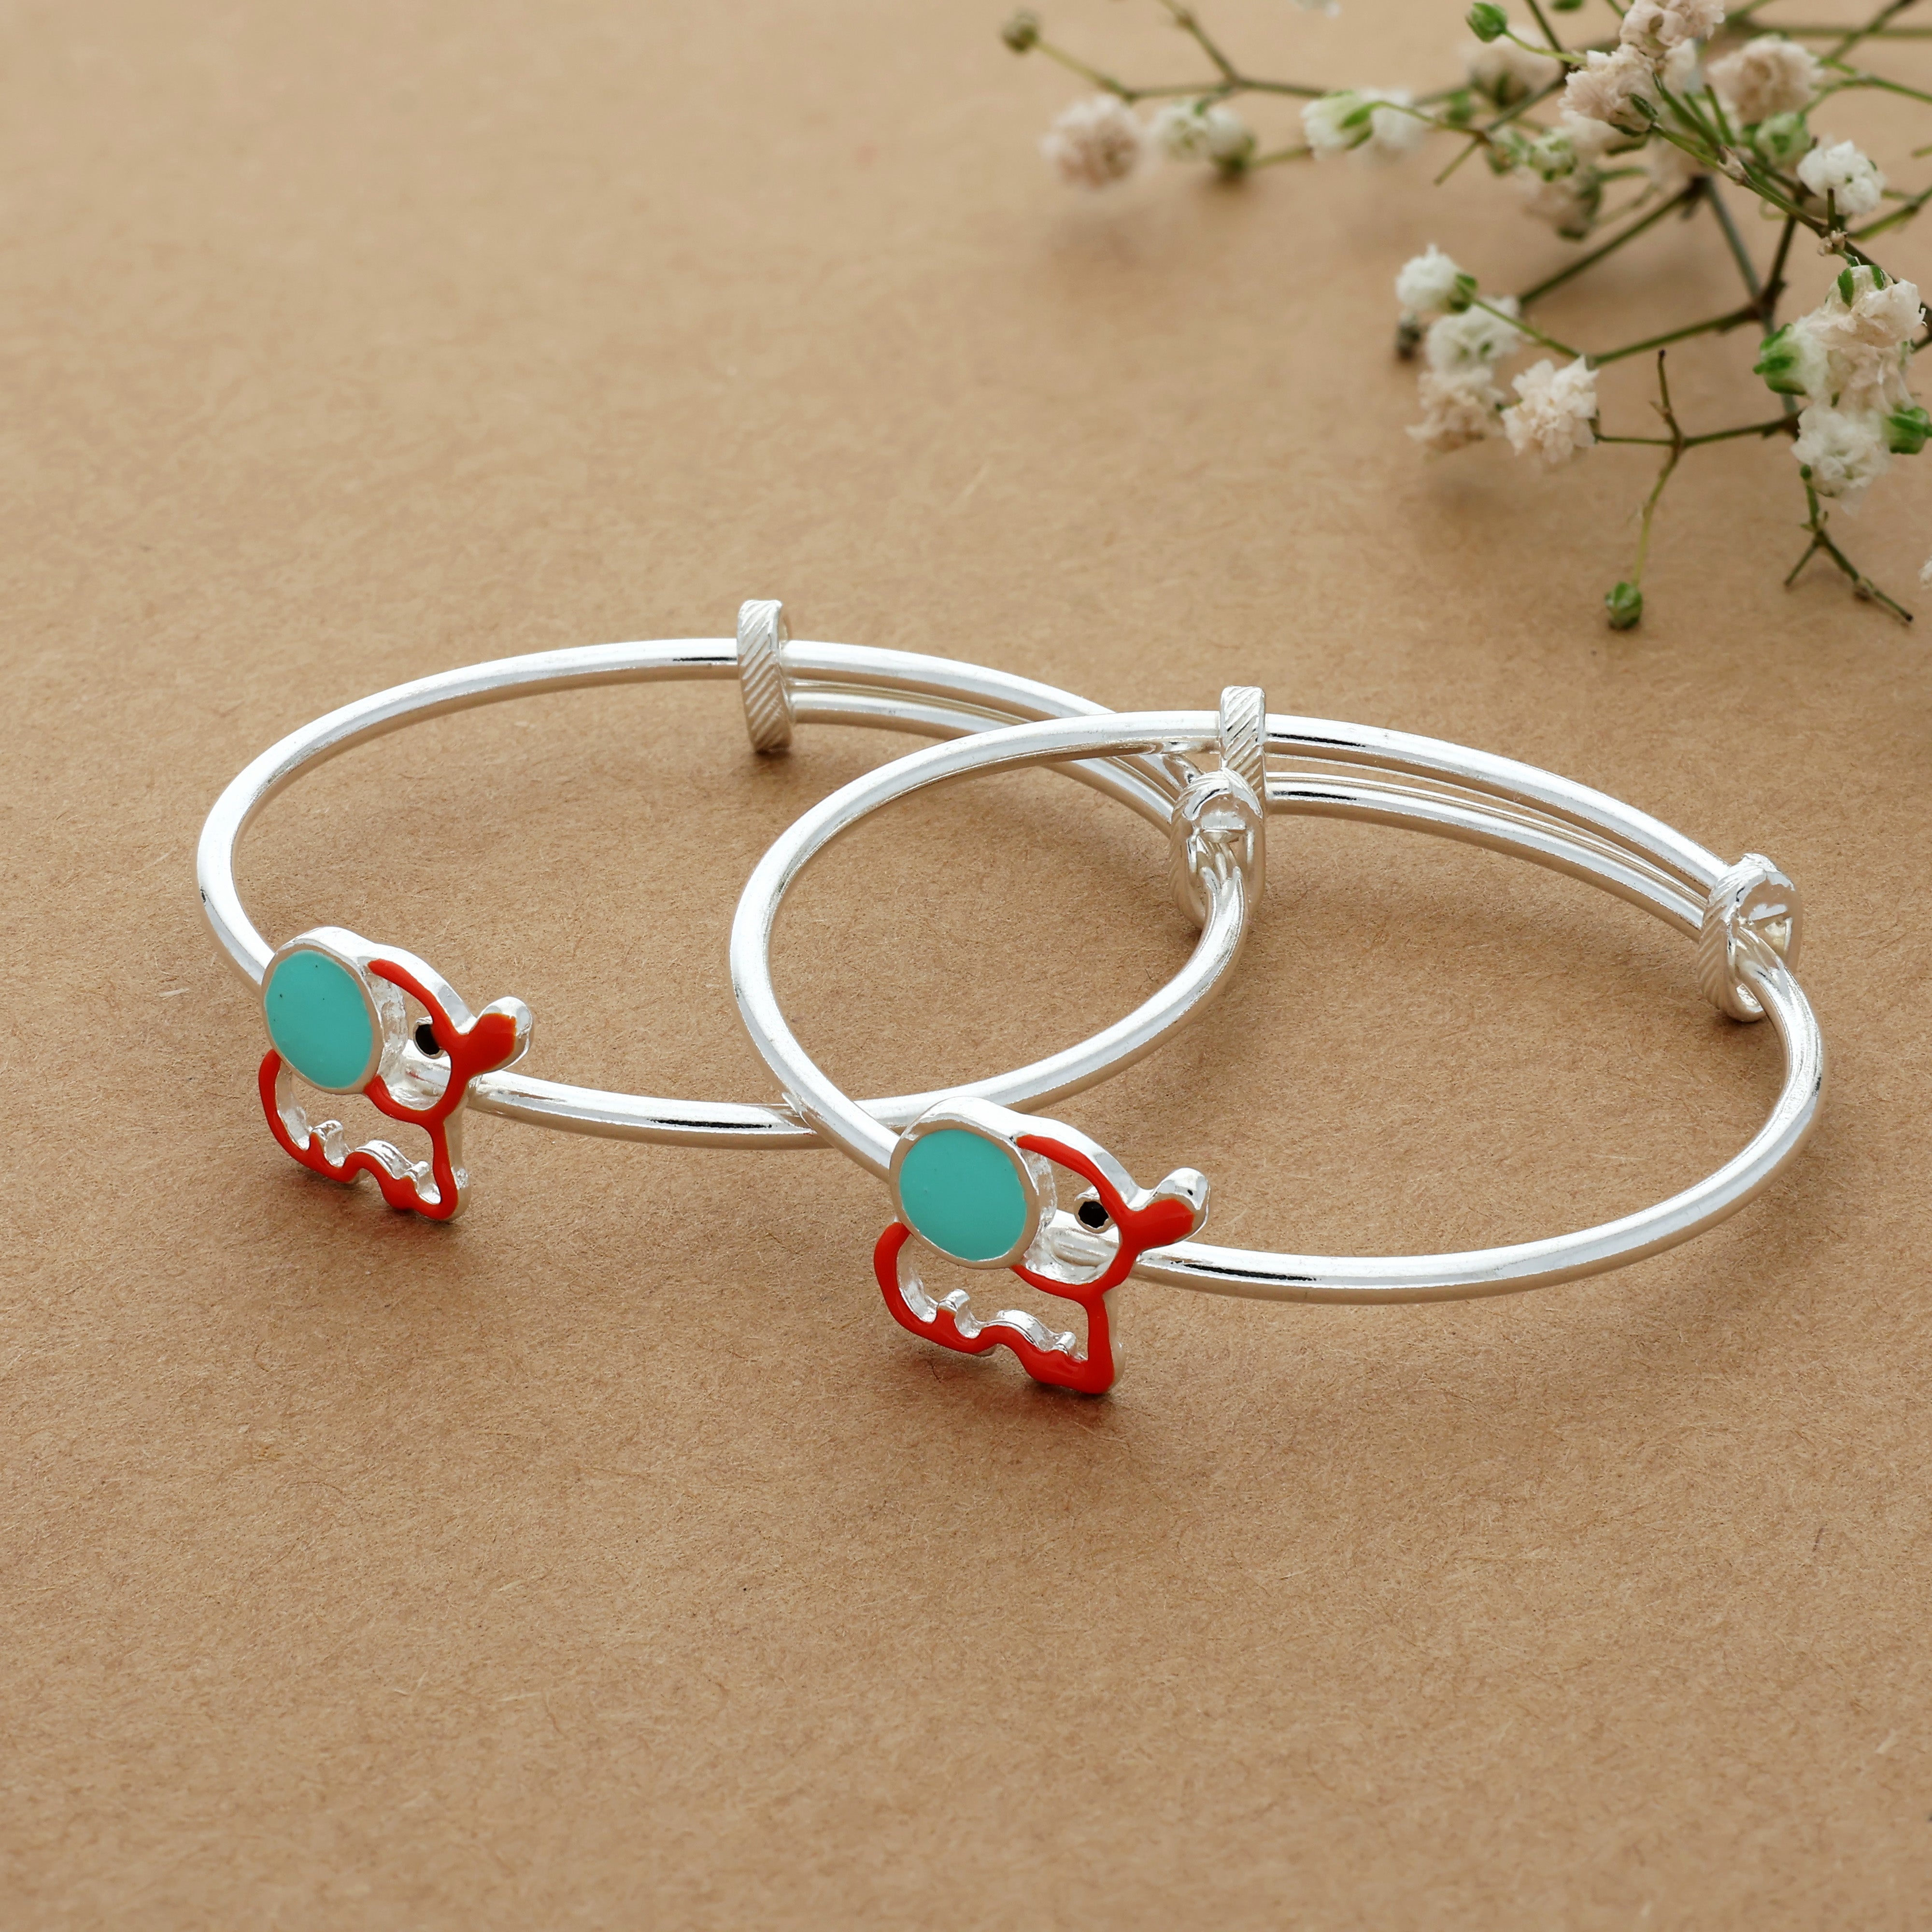 adjustable pure silver bangle with elephant design for baby boy or girl from 0 to 5 years